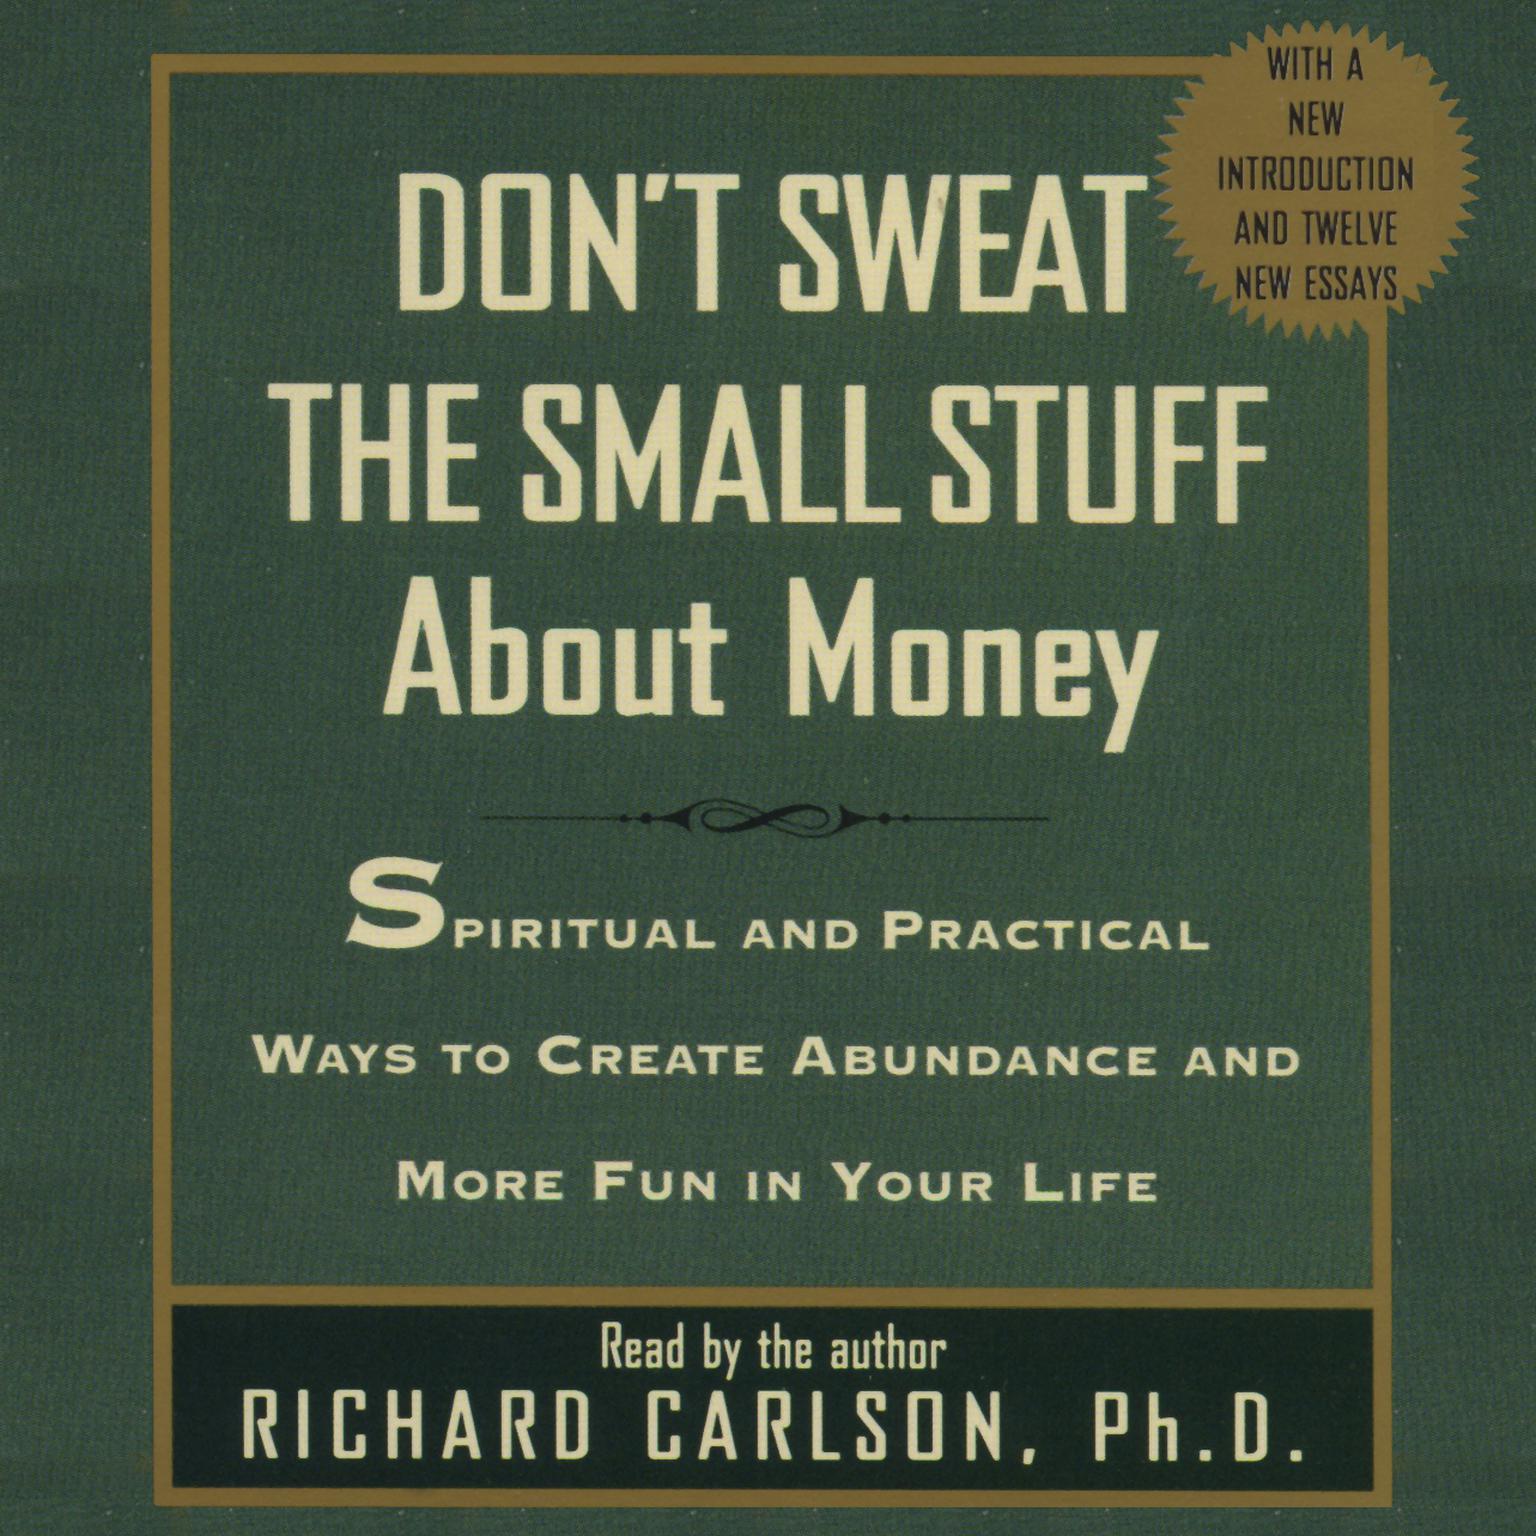 Don’t Sweat the Small Stuff about Money (Abridged): Spiritual and Practical Ways to Create Abundance and More Fun in Your Life Audiobook, by Richard Carlson